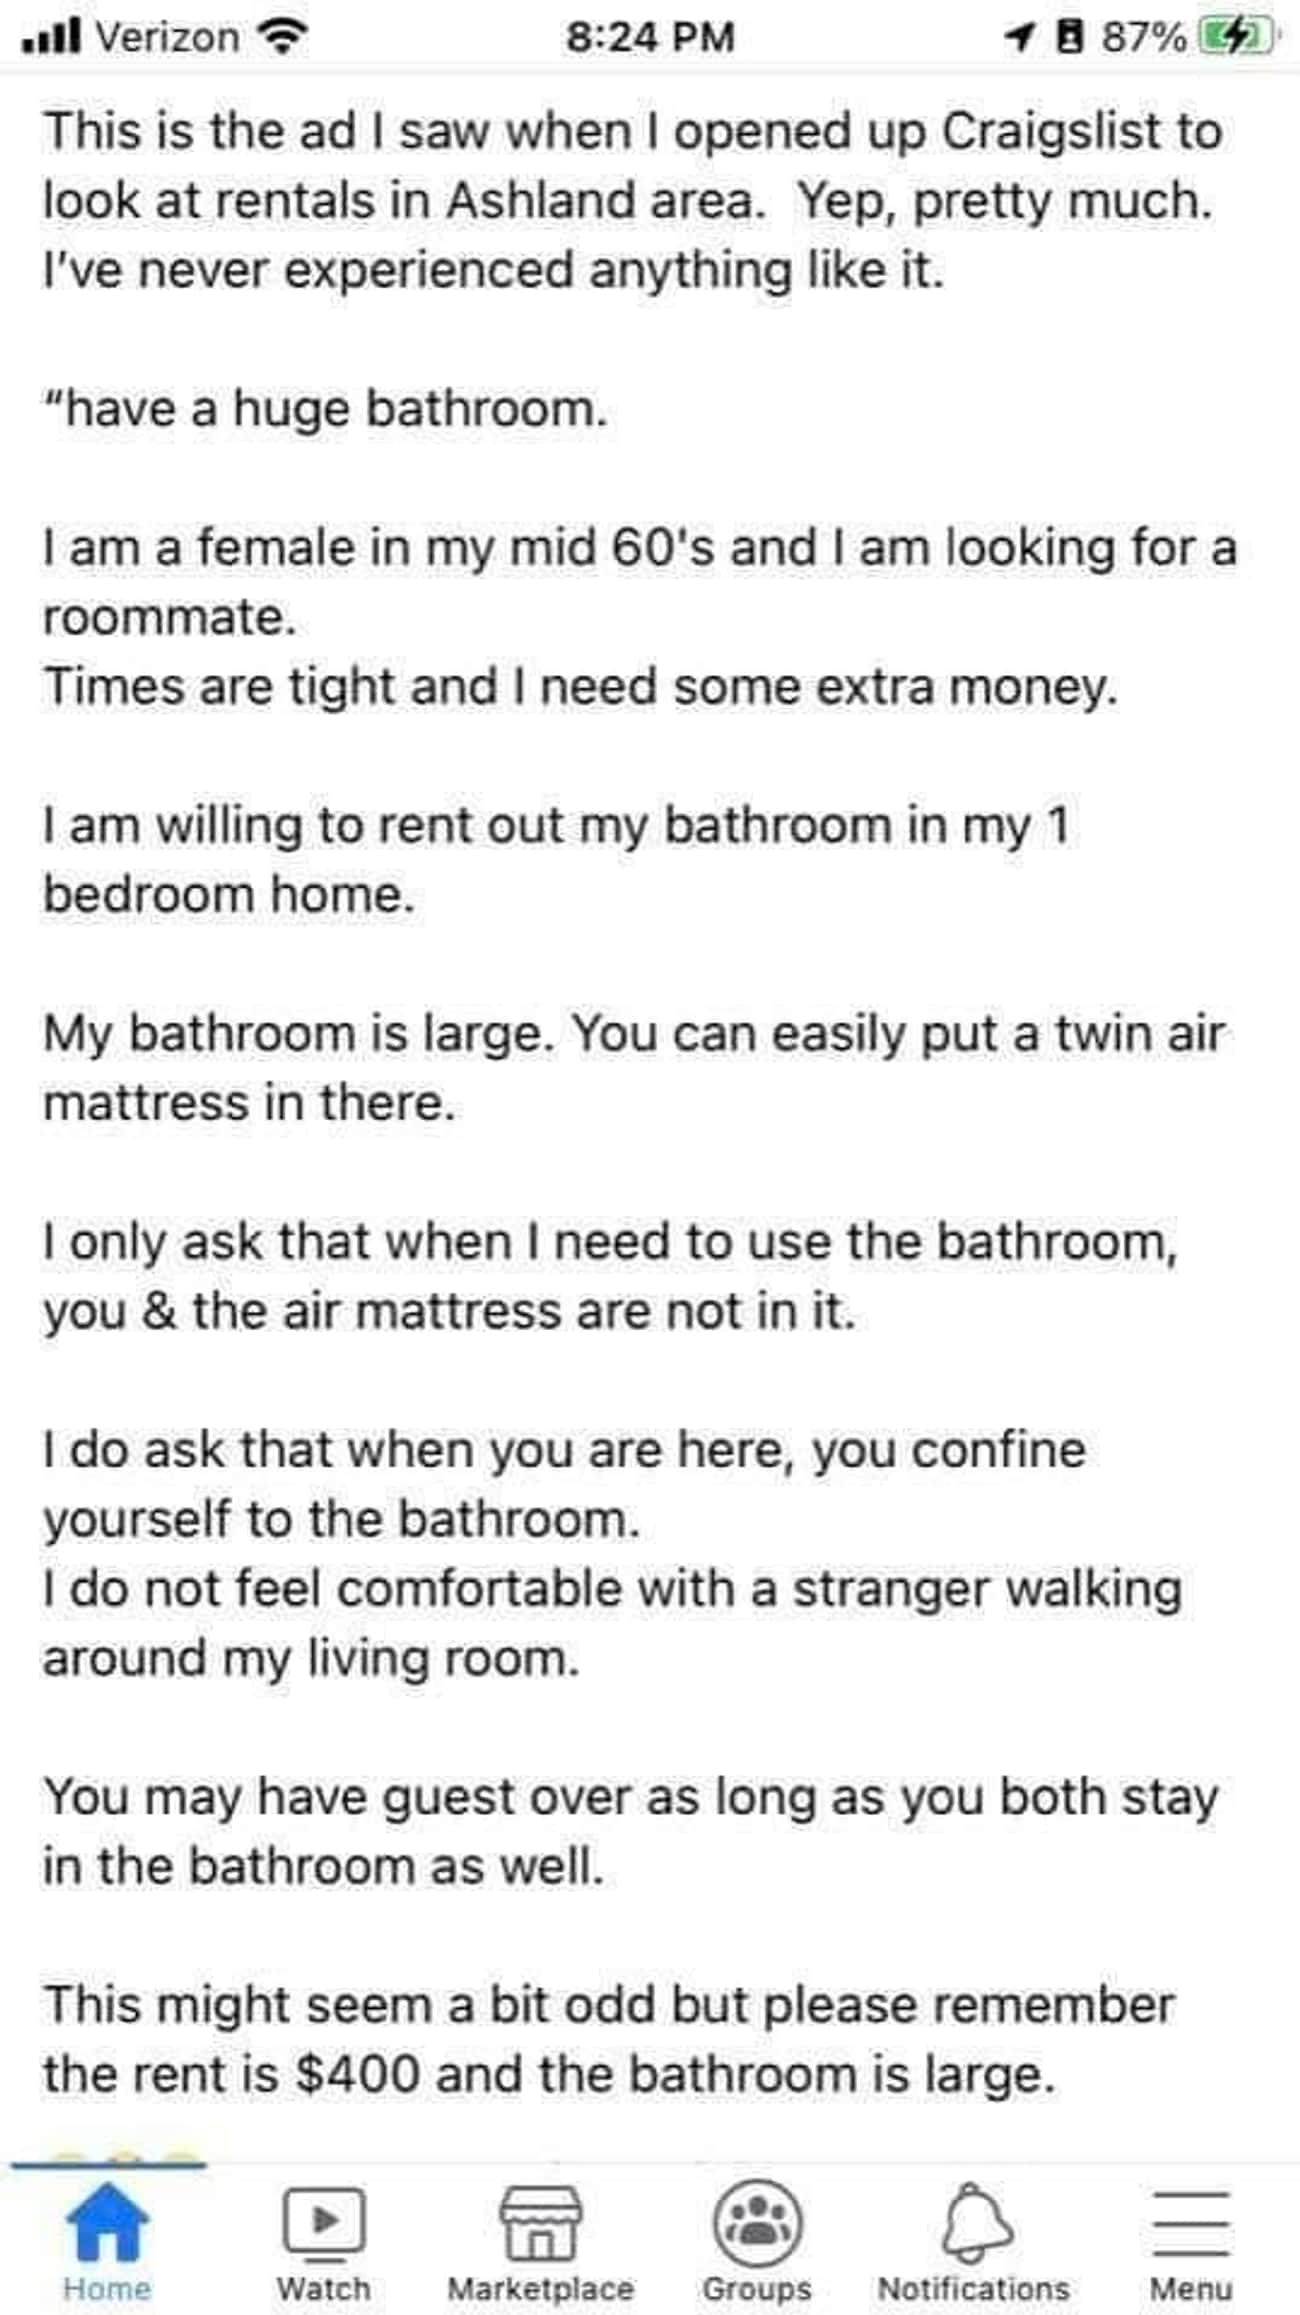 Aspiring Landlord Wants People To Live In Her Bathroom, But To Leave While She's Using The Toilet